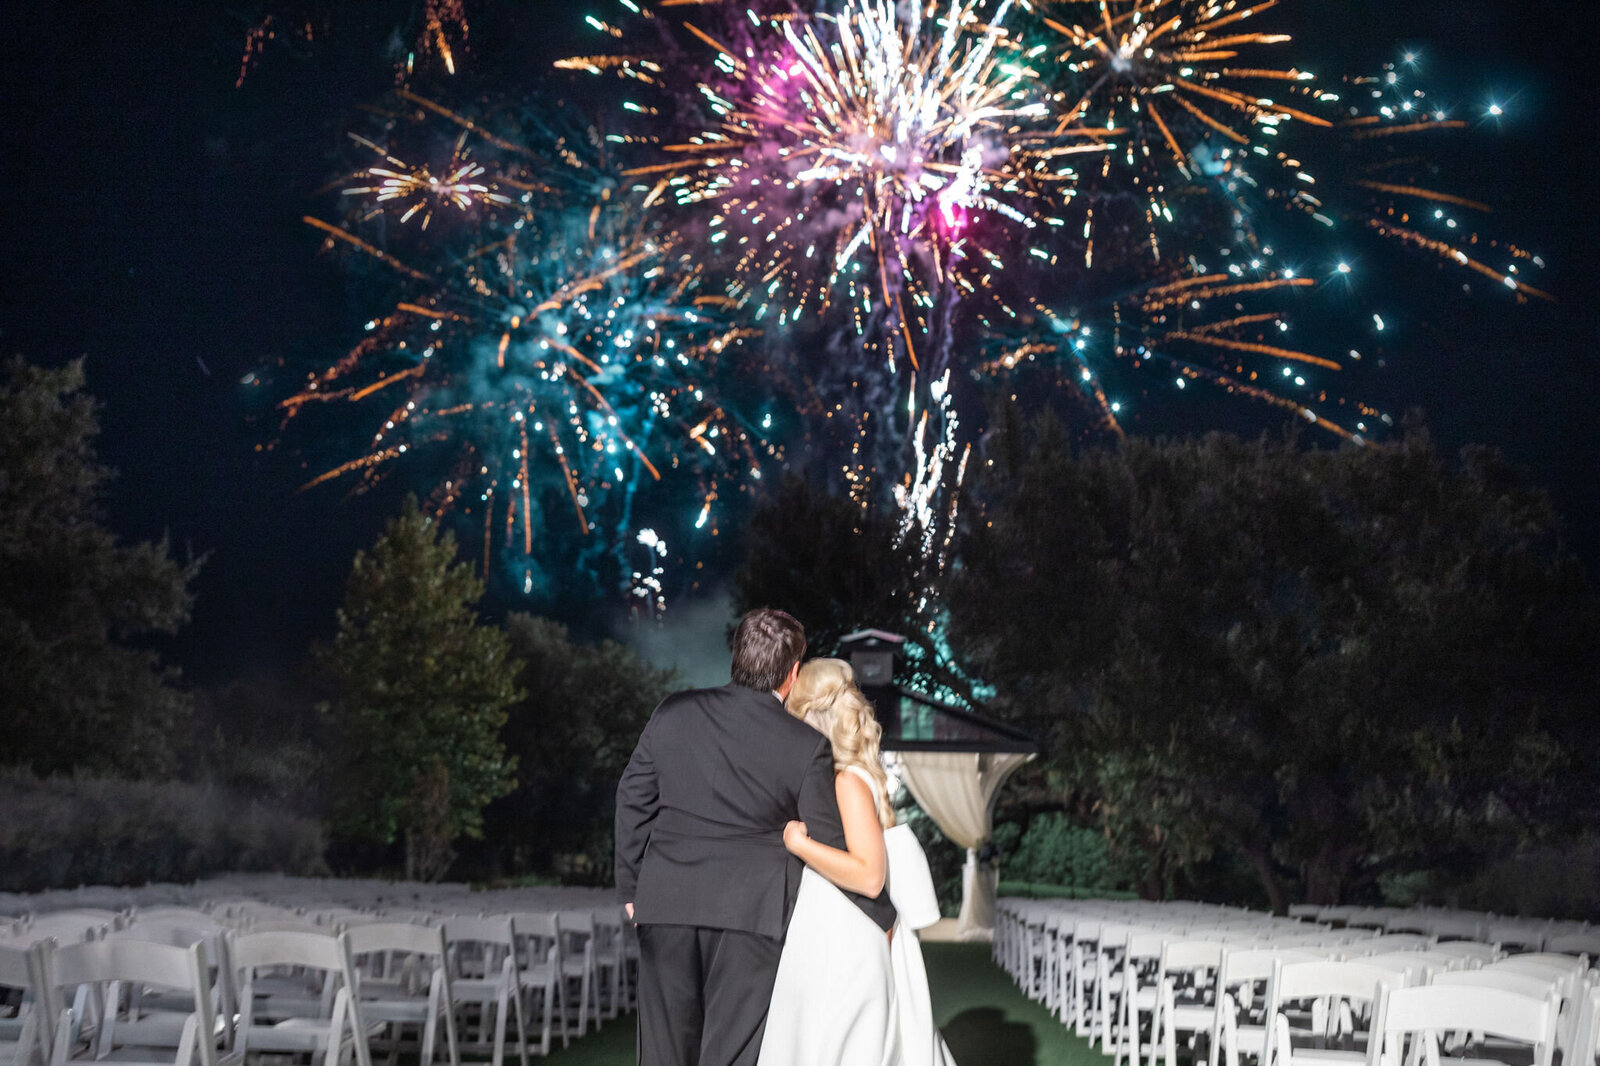 Bride and groom watch fireworks during their wedding reception.